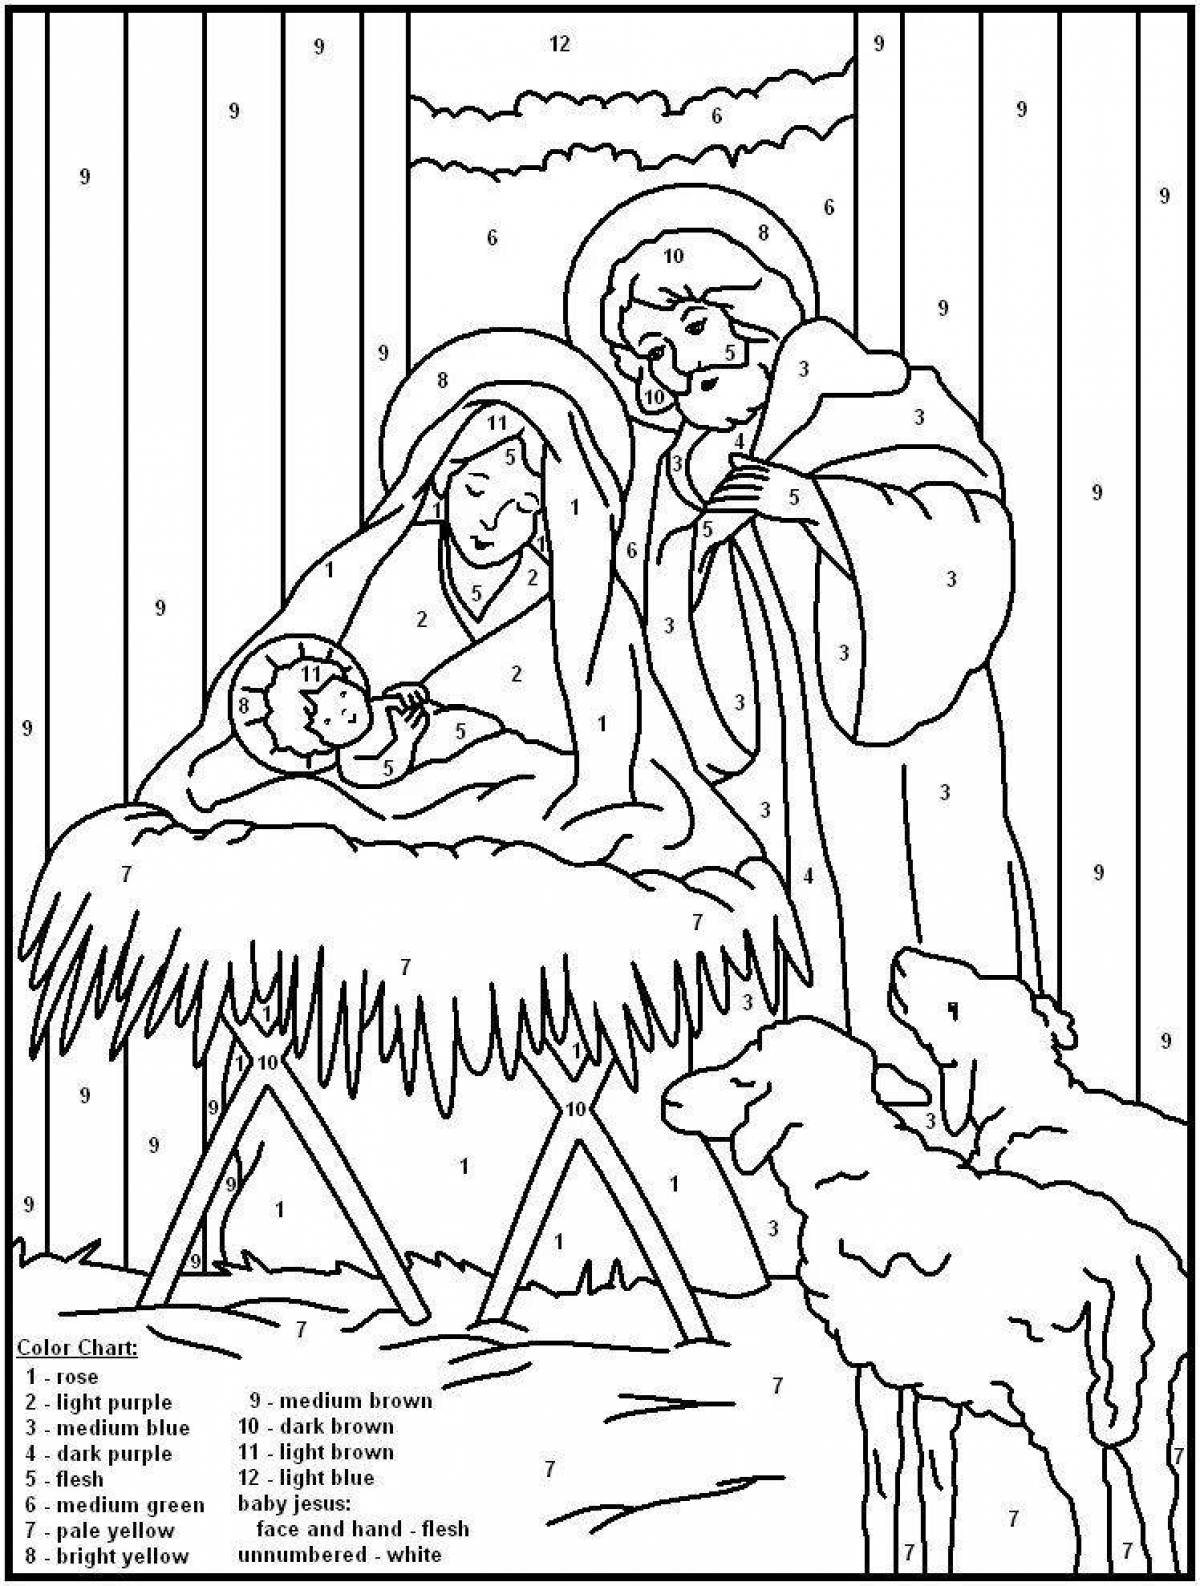 Merry Christmas shining coloring book